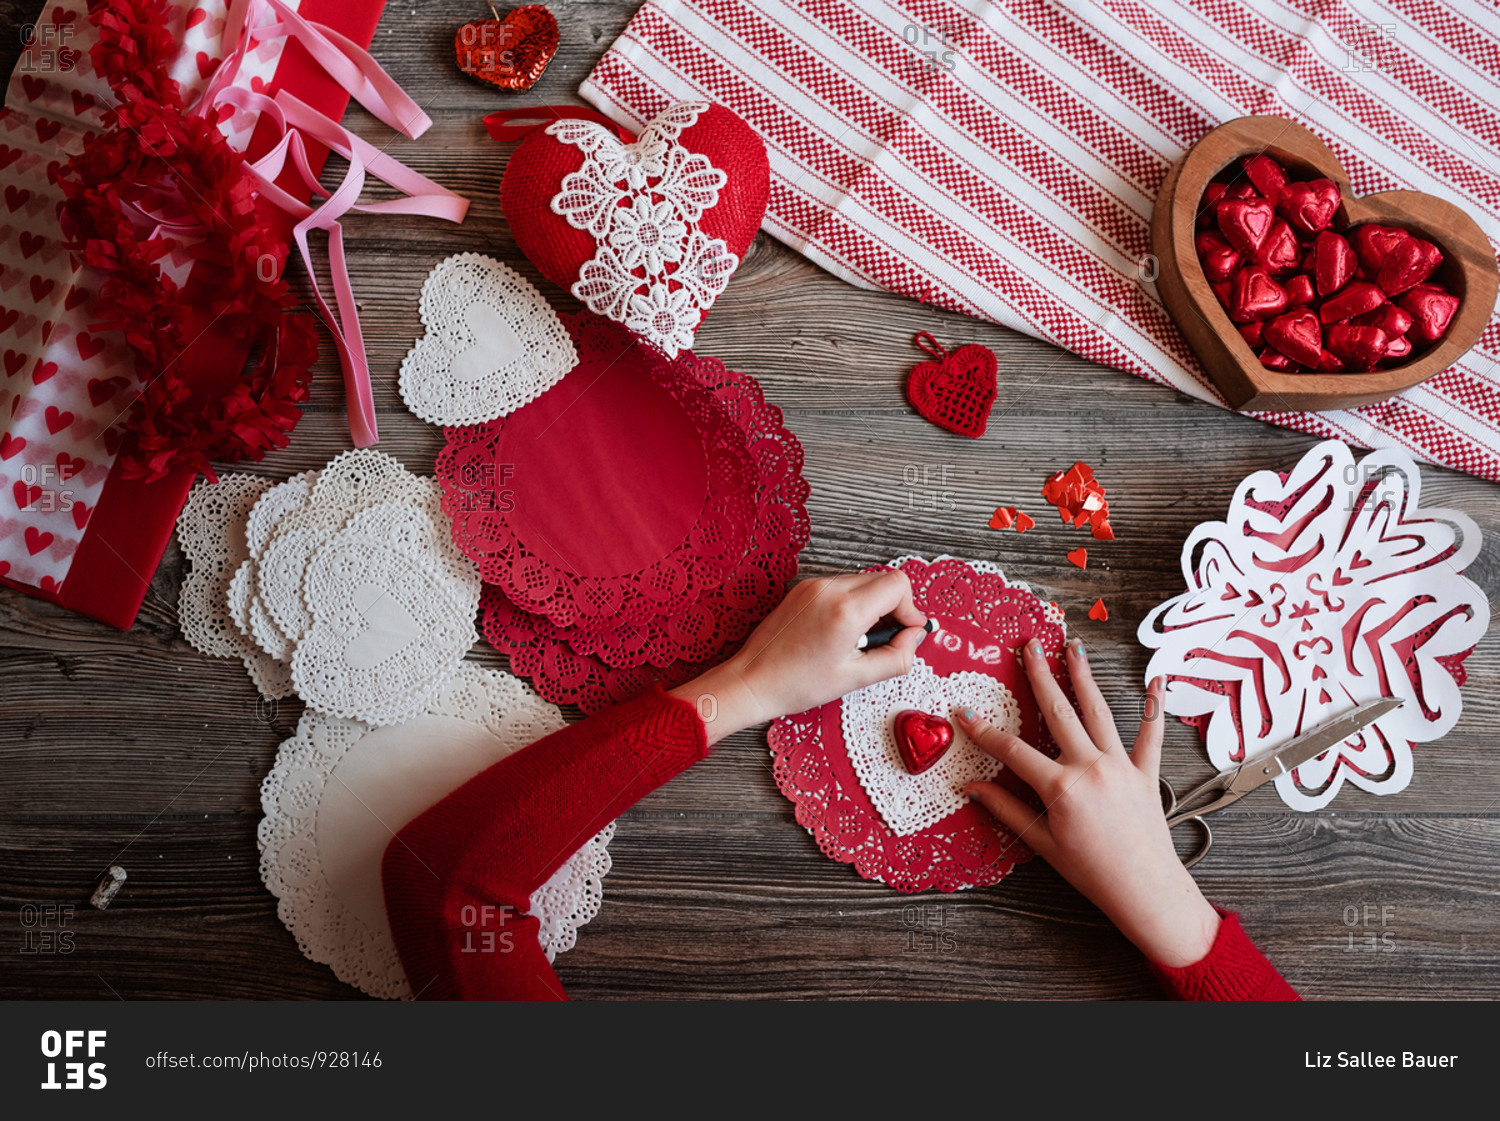 Flat lay overhead image of a young girl making valentines
stock photo - OFFSET